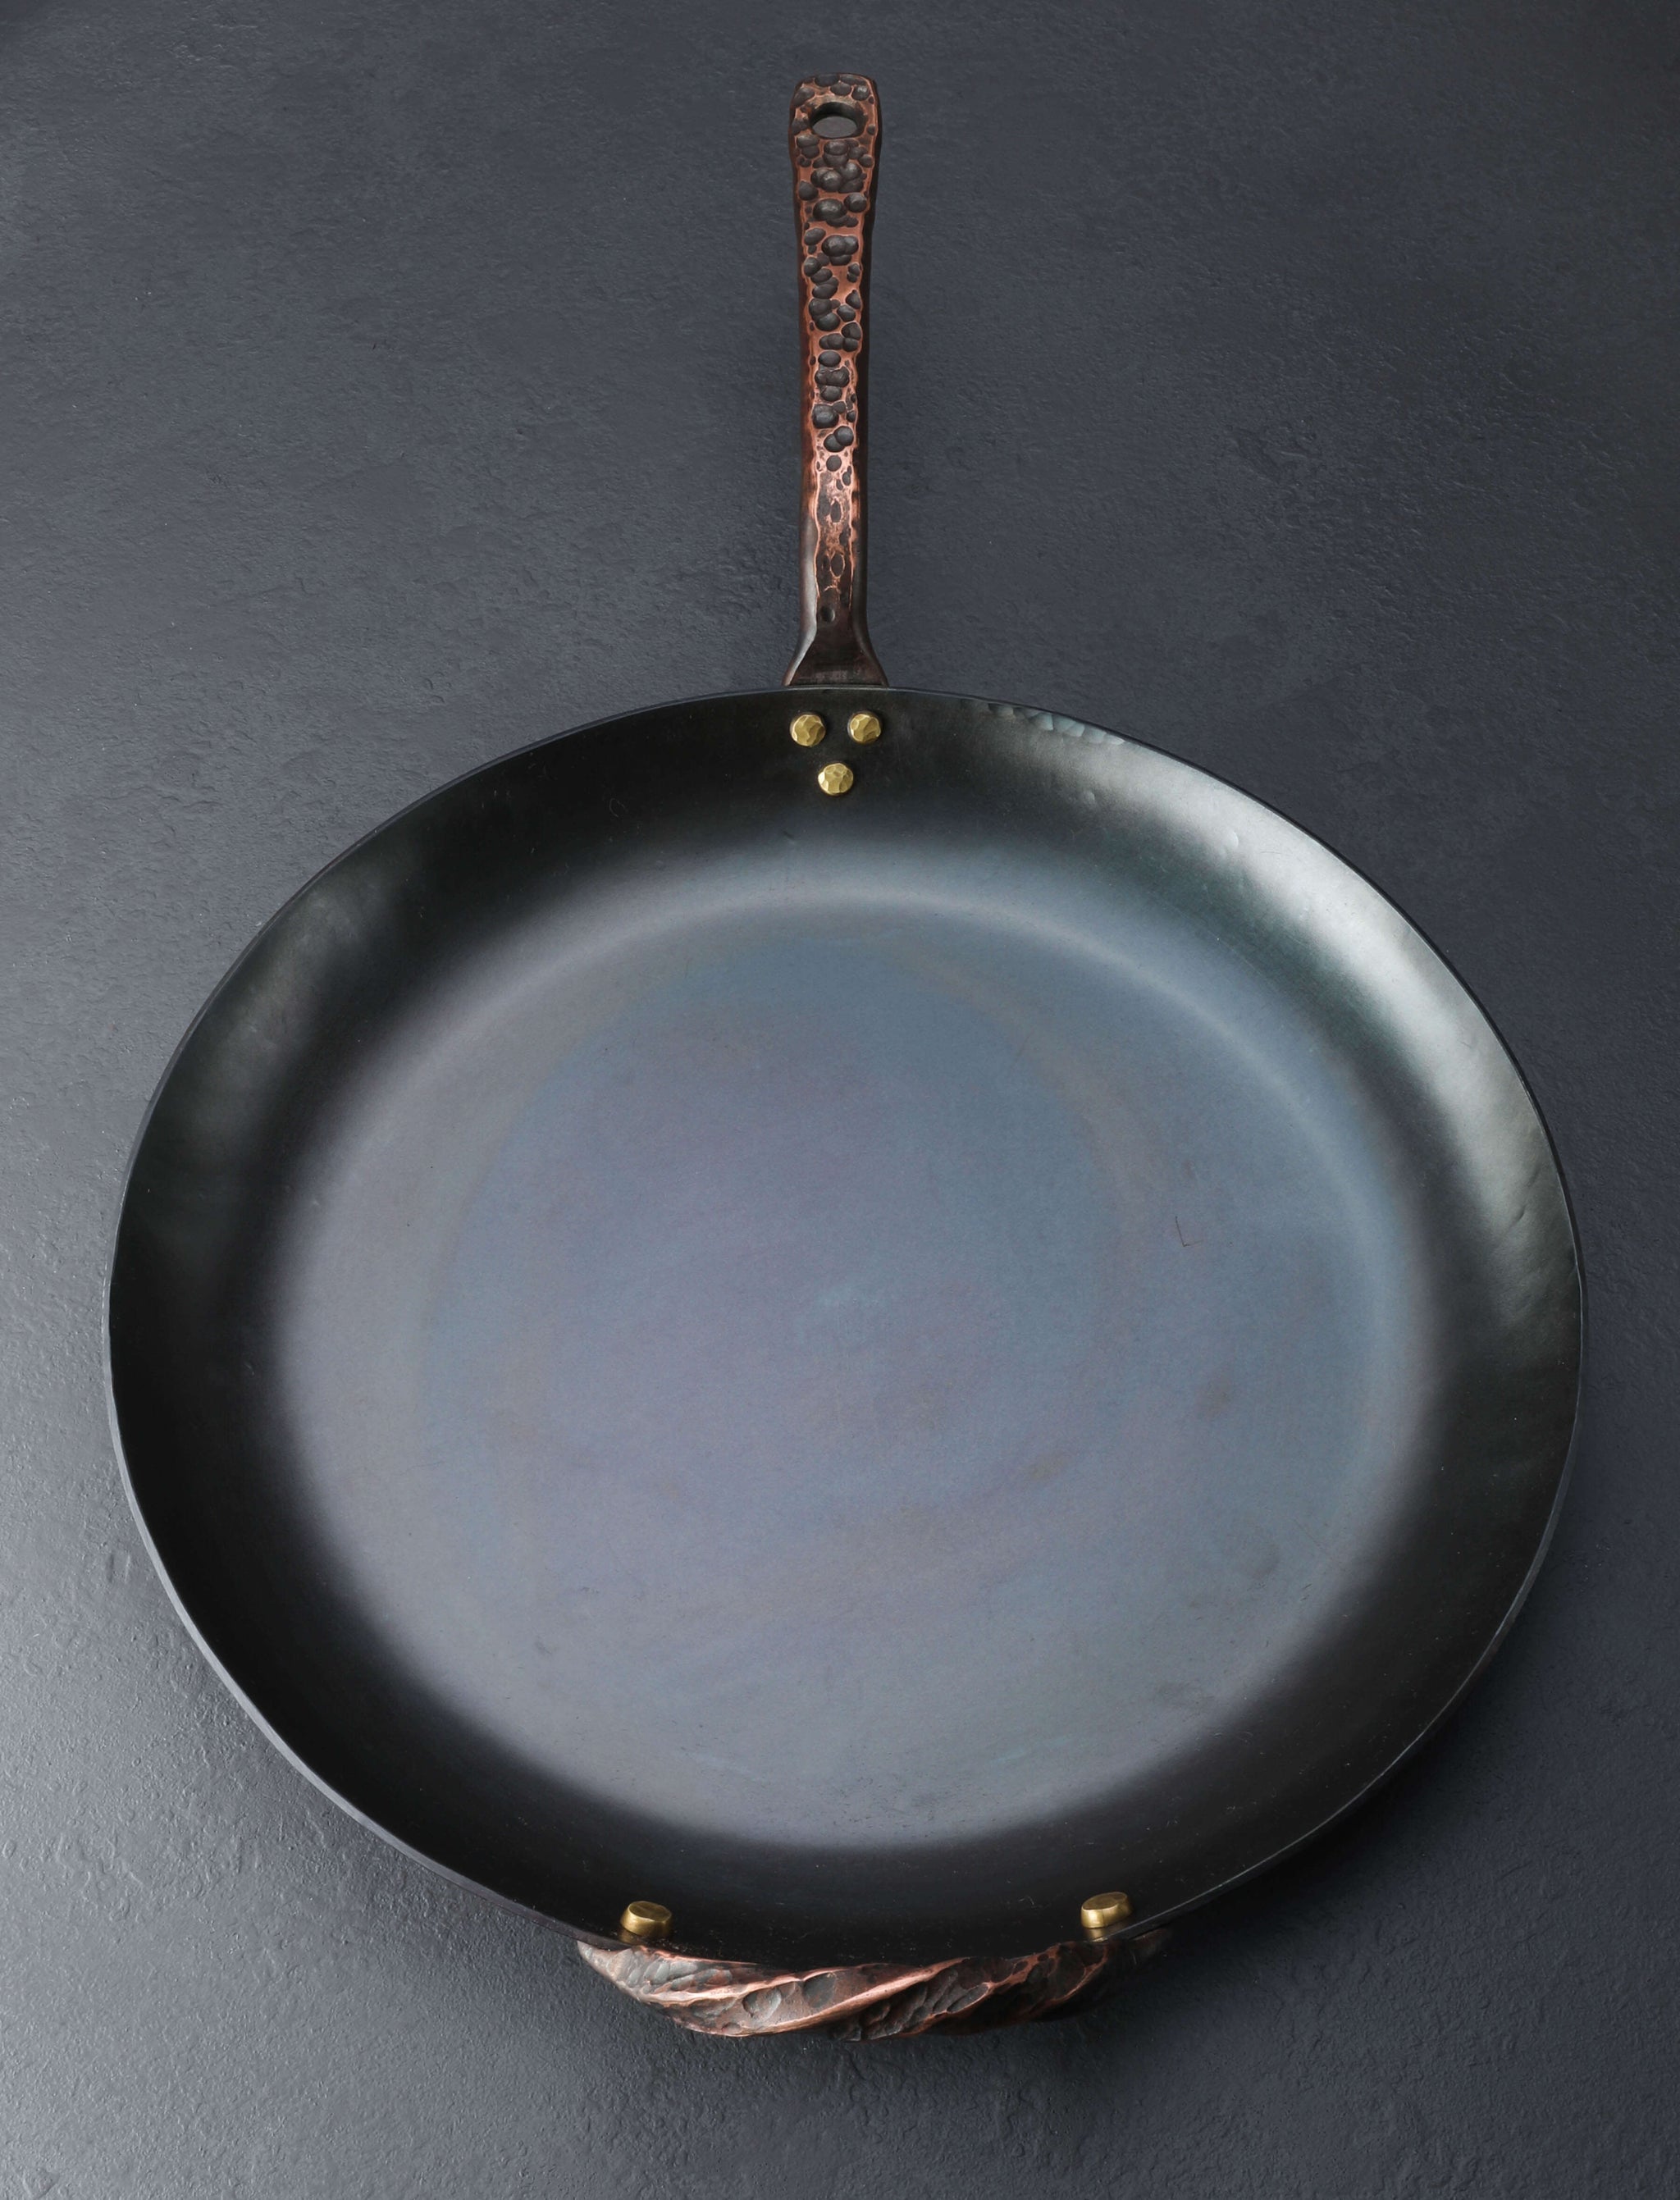 12 Round Carbon Steel Skillet - Hand Forged